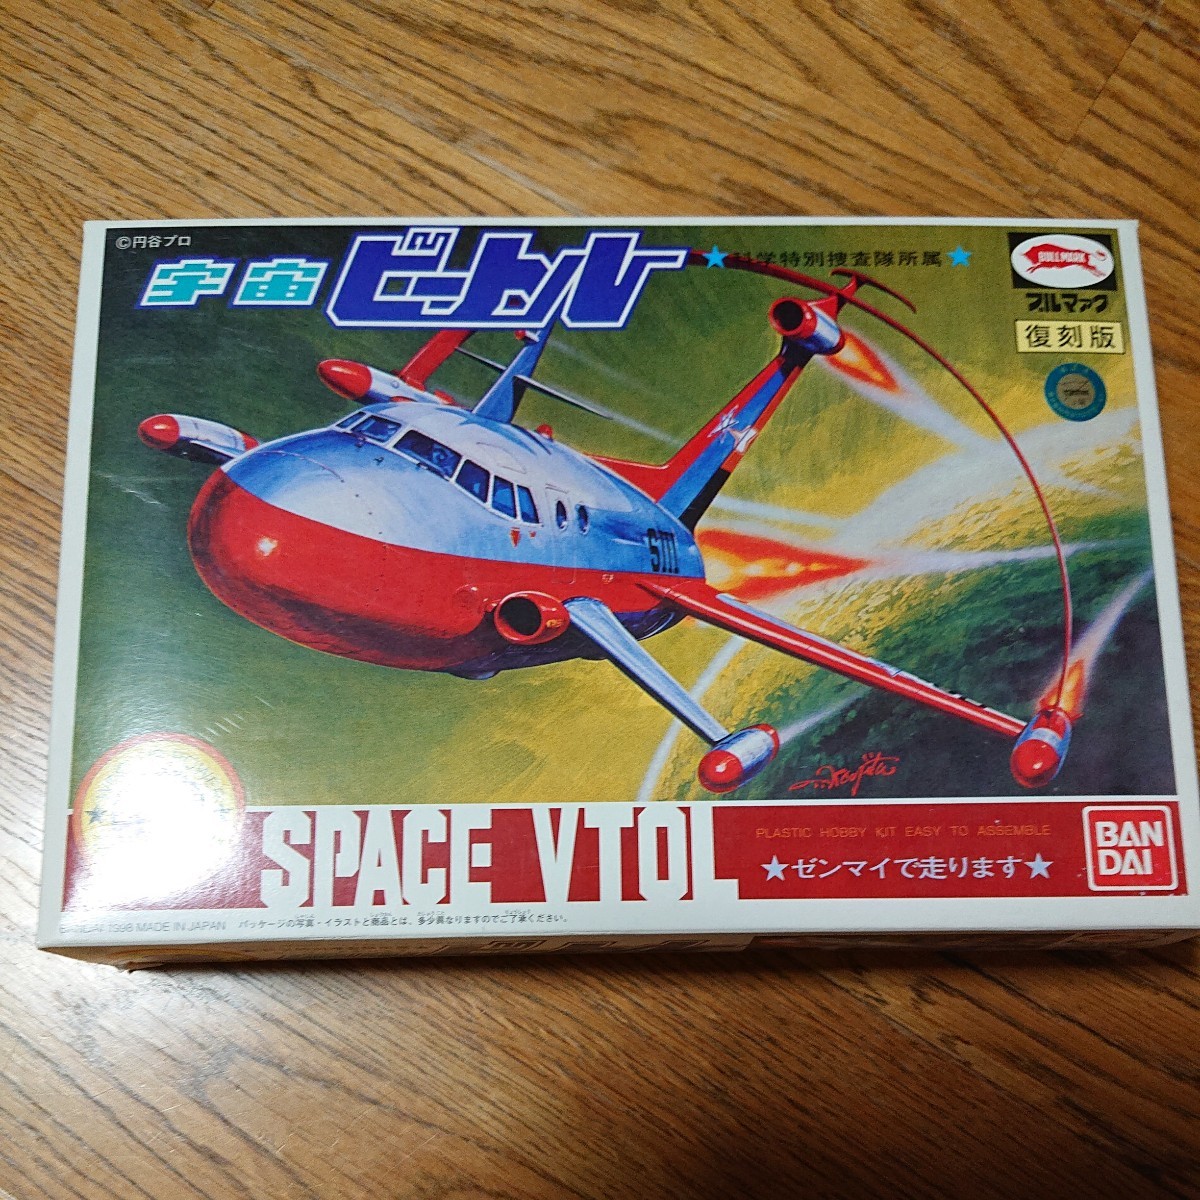 [ not yet constructed plastic model ] Bandai science special ... place . cosmos Beetle bruma.k reprint 